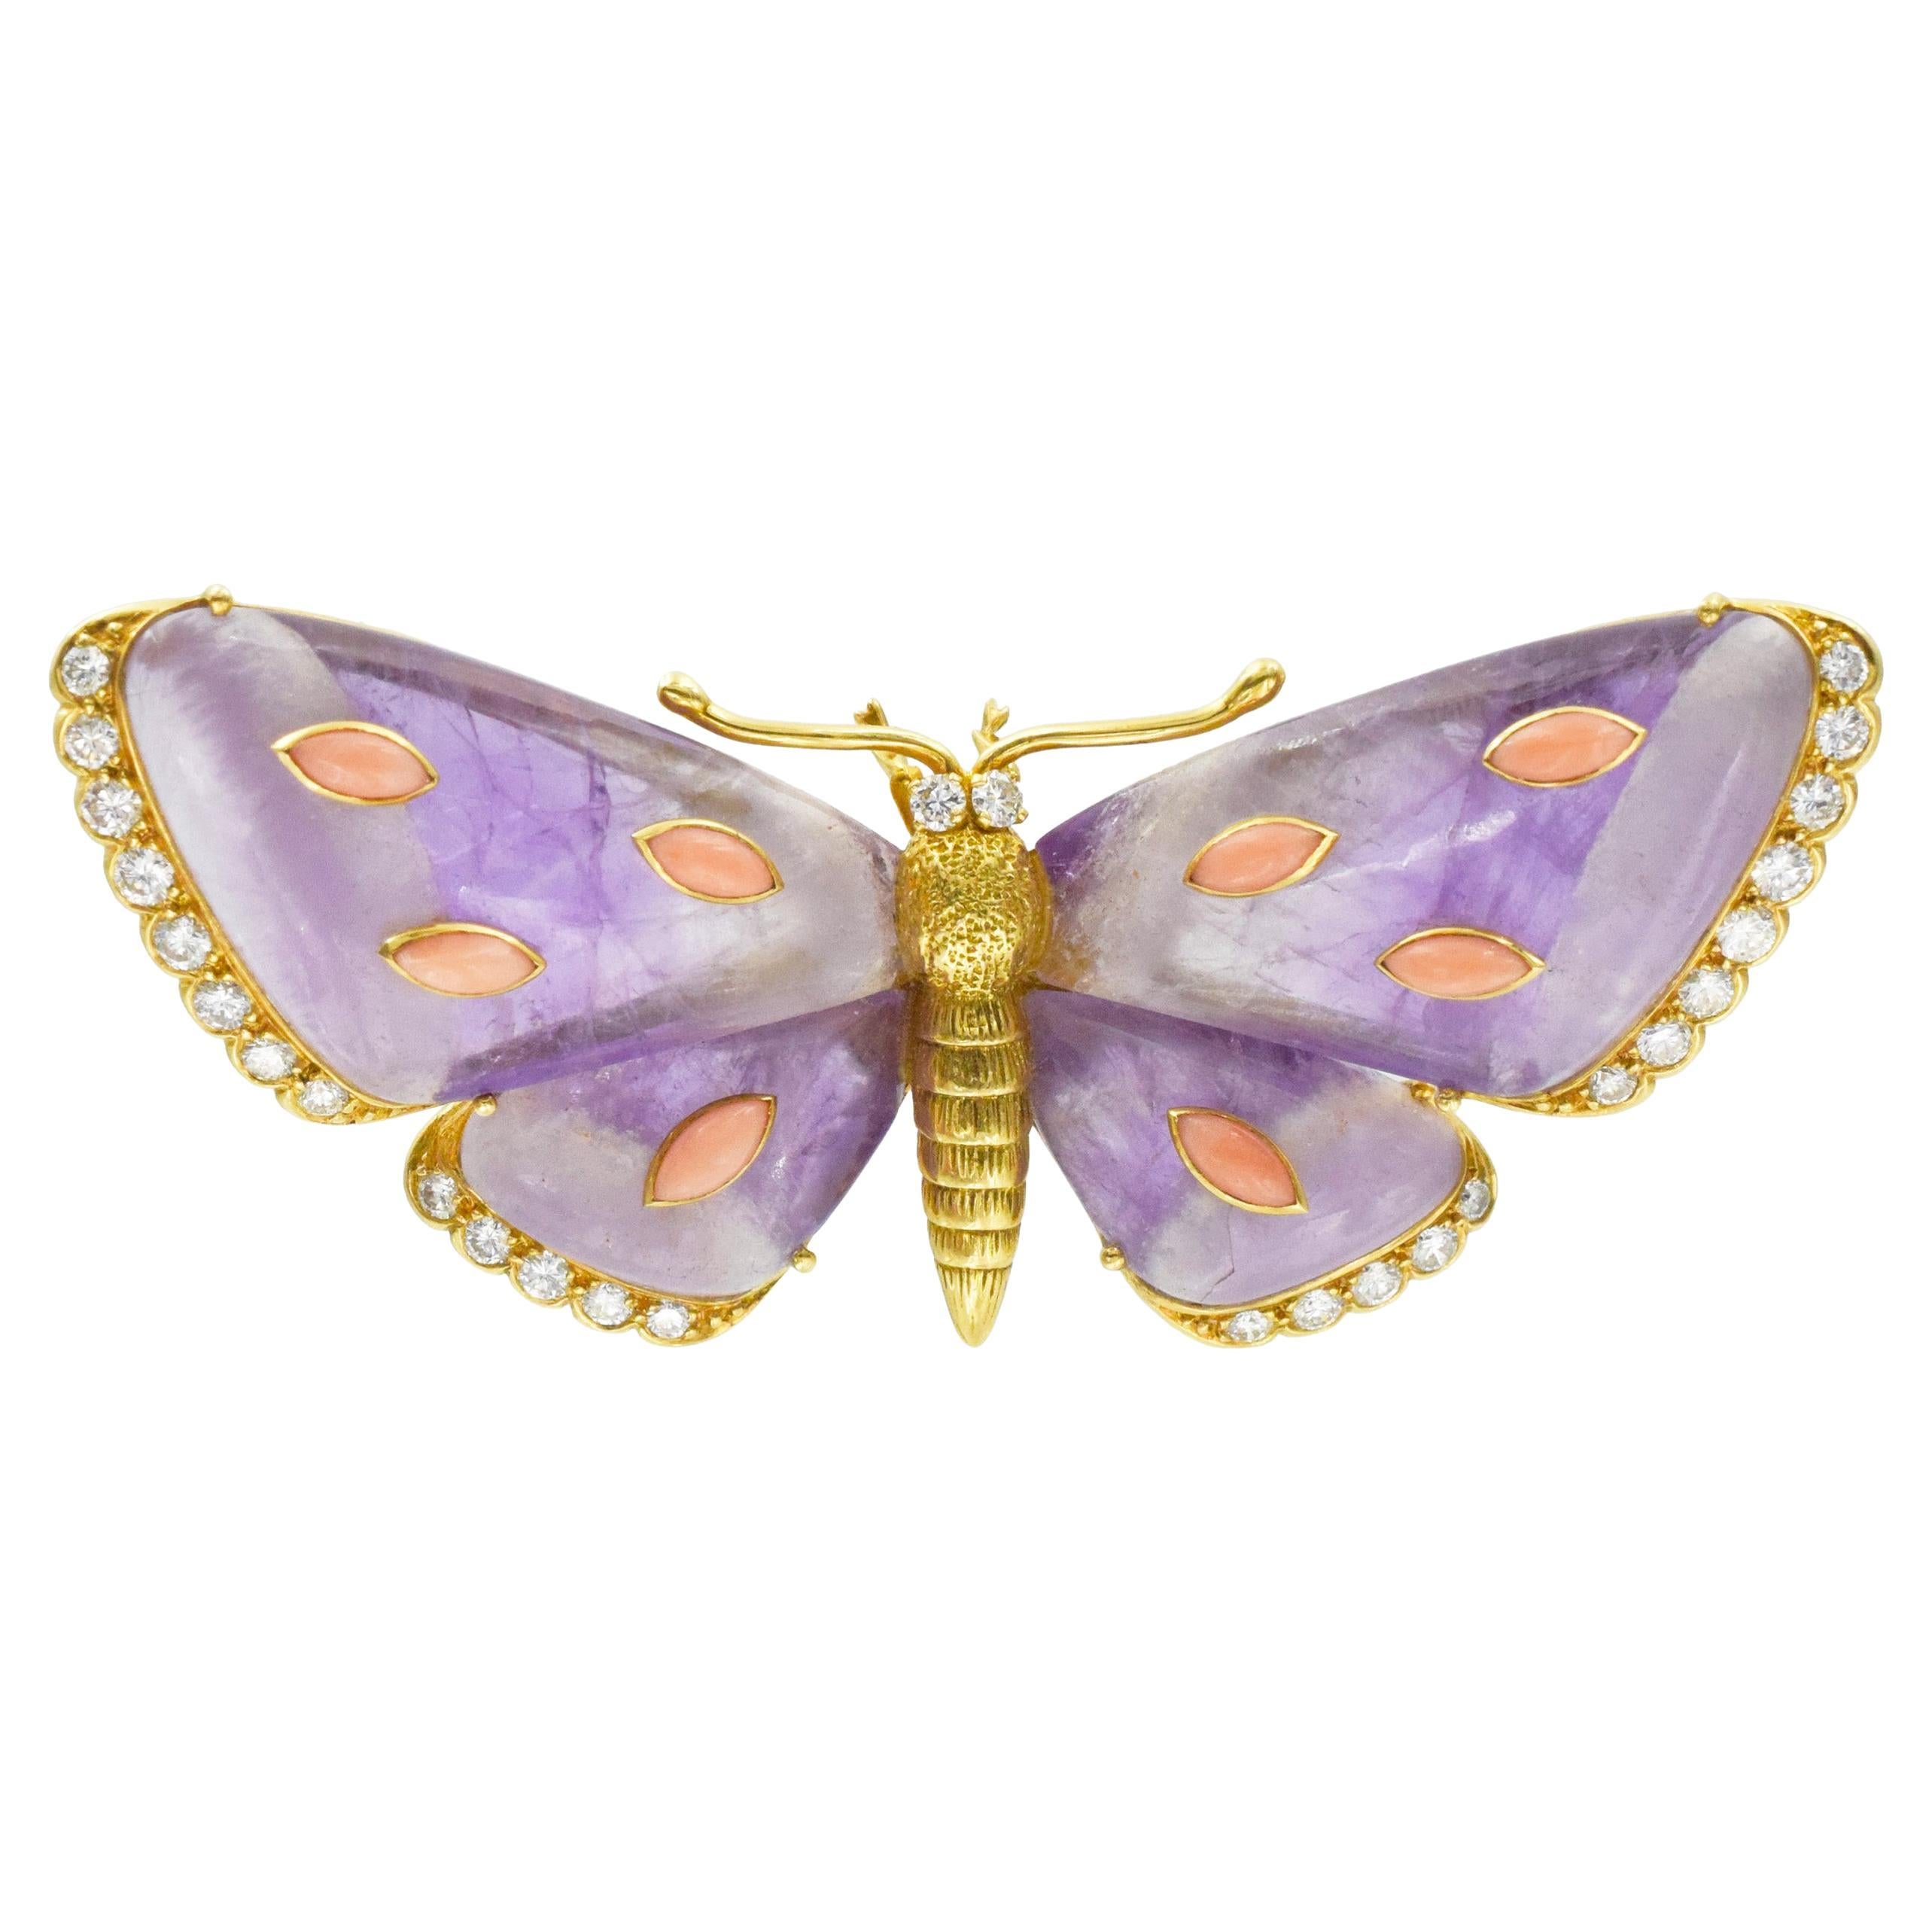 Amethyst, Diamond and Coral Butterfly Brooch